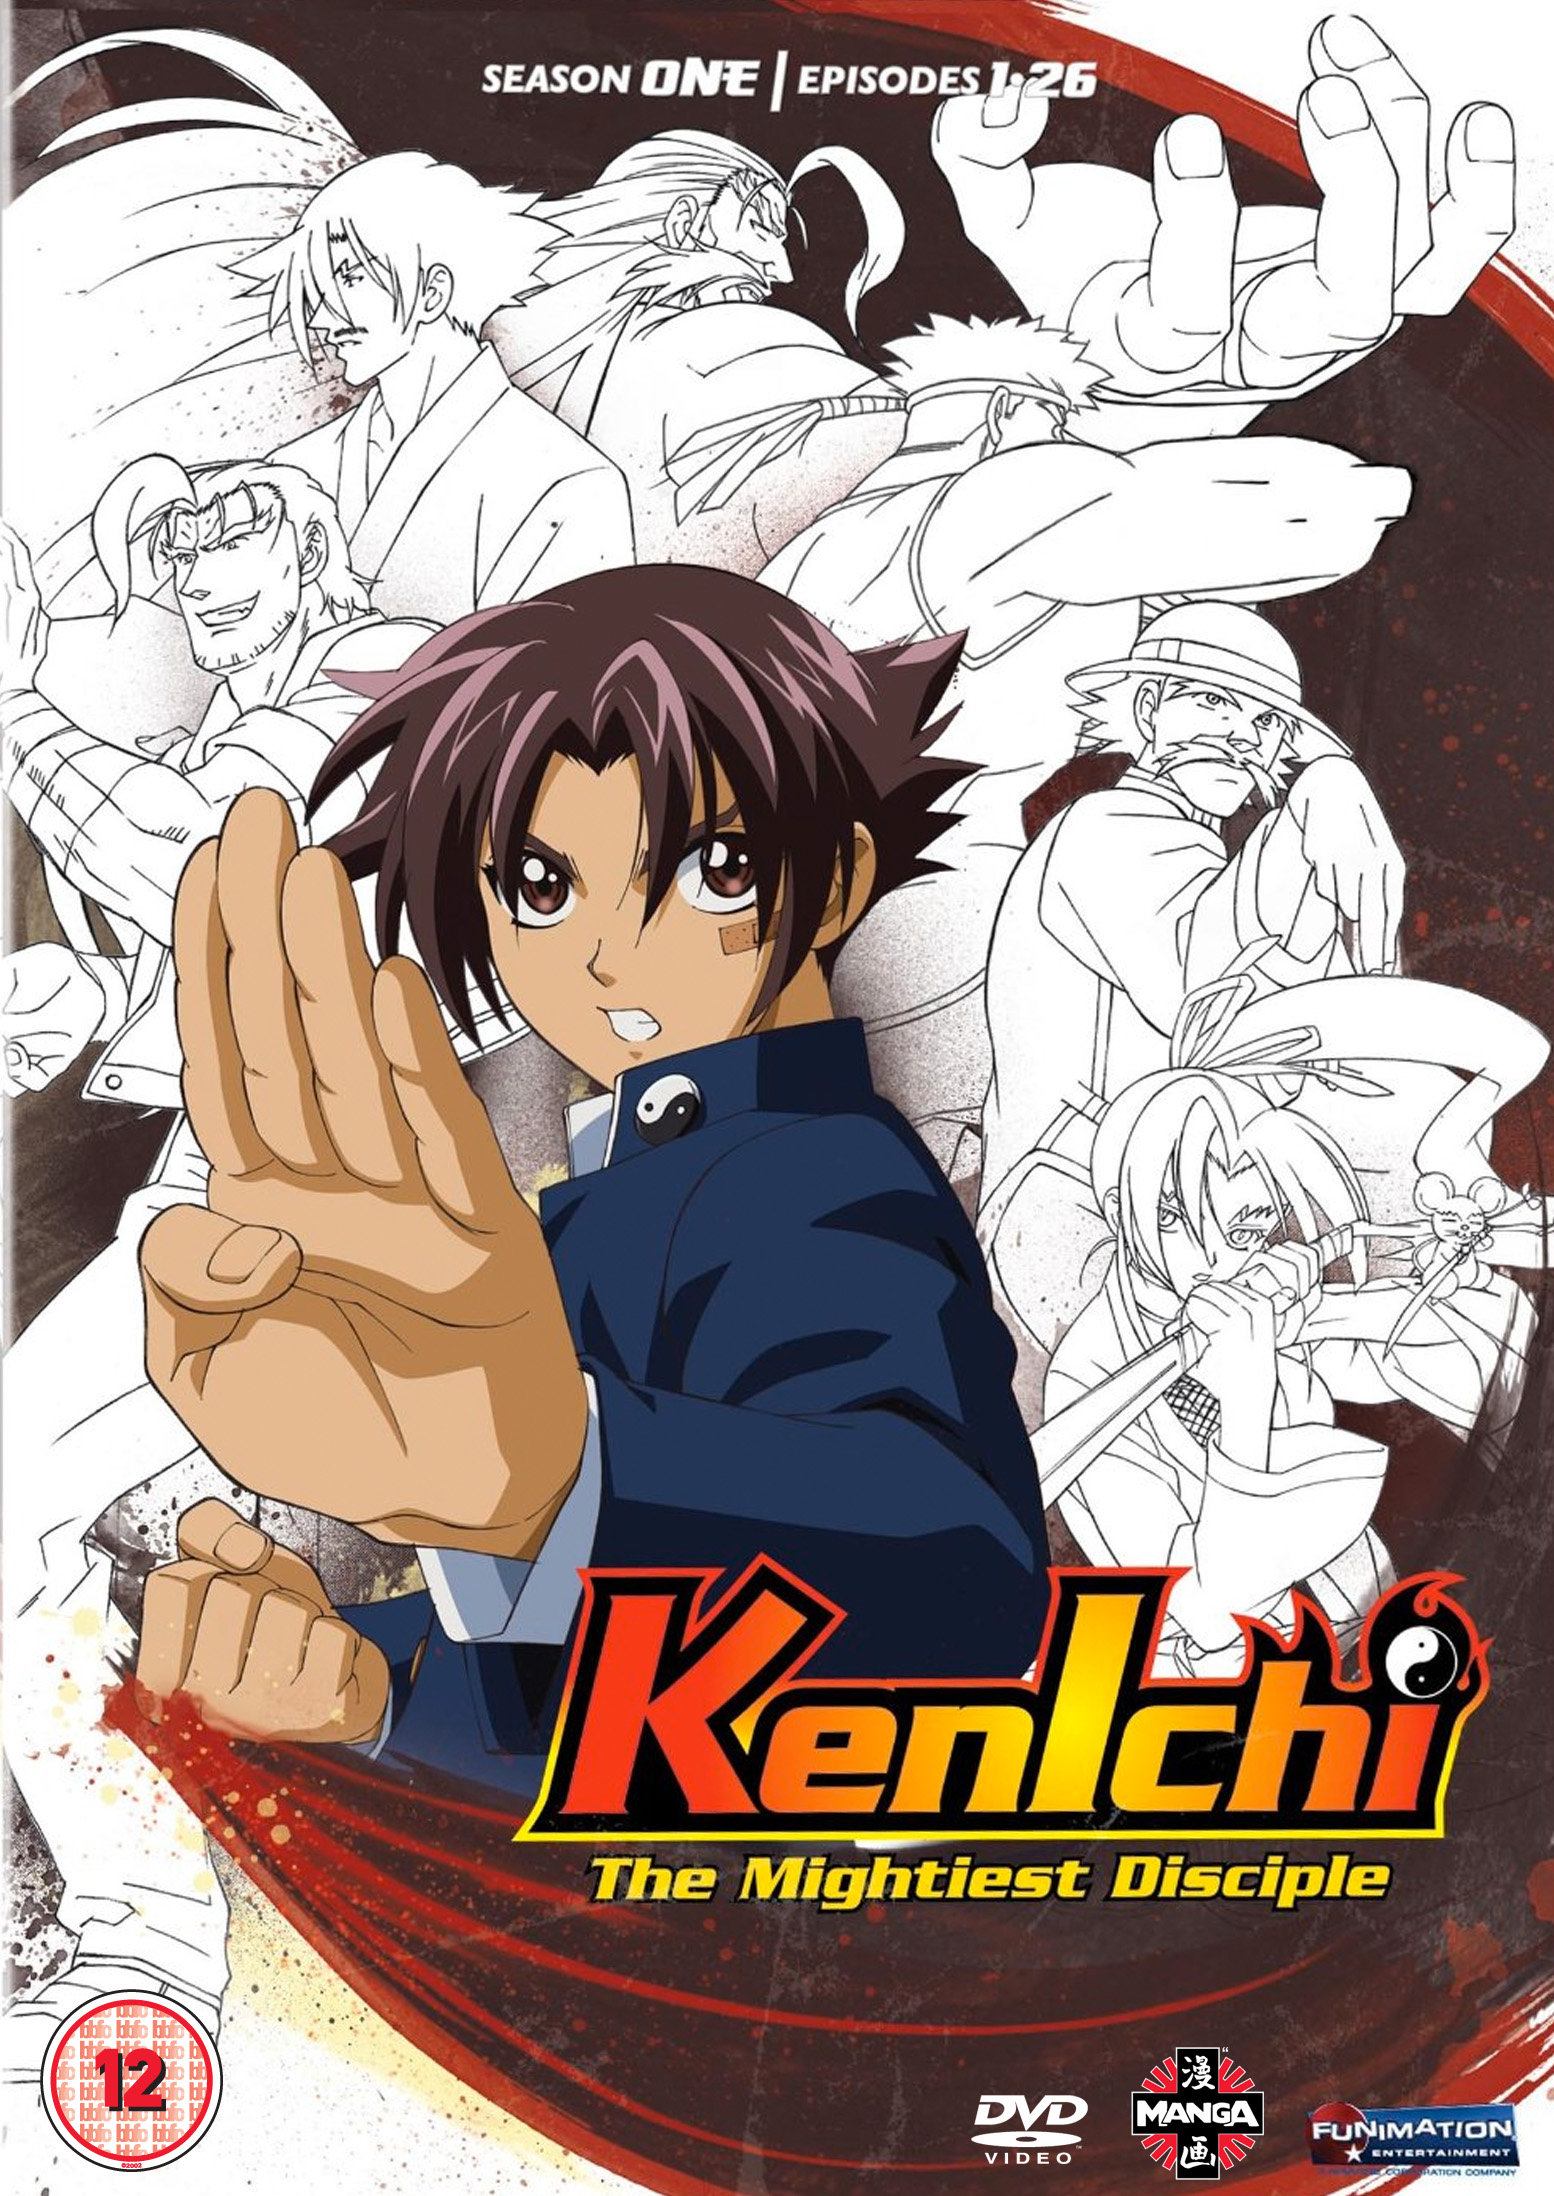 About the DVD - Kenichi: The Mightiest Disciple Part 1.